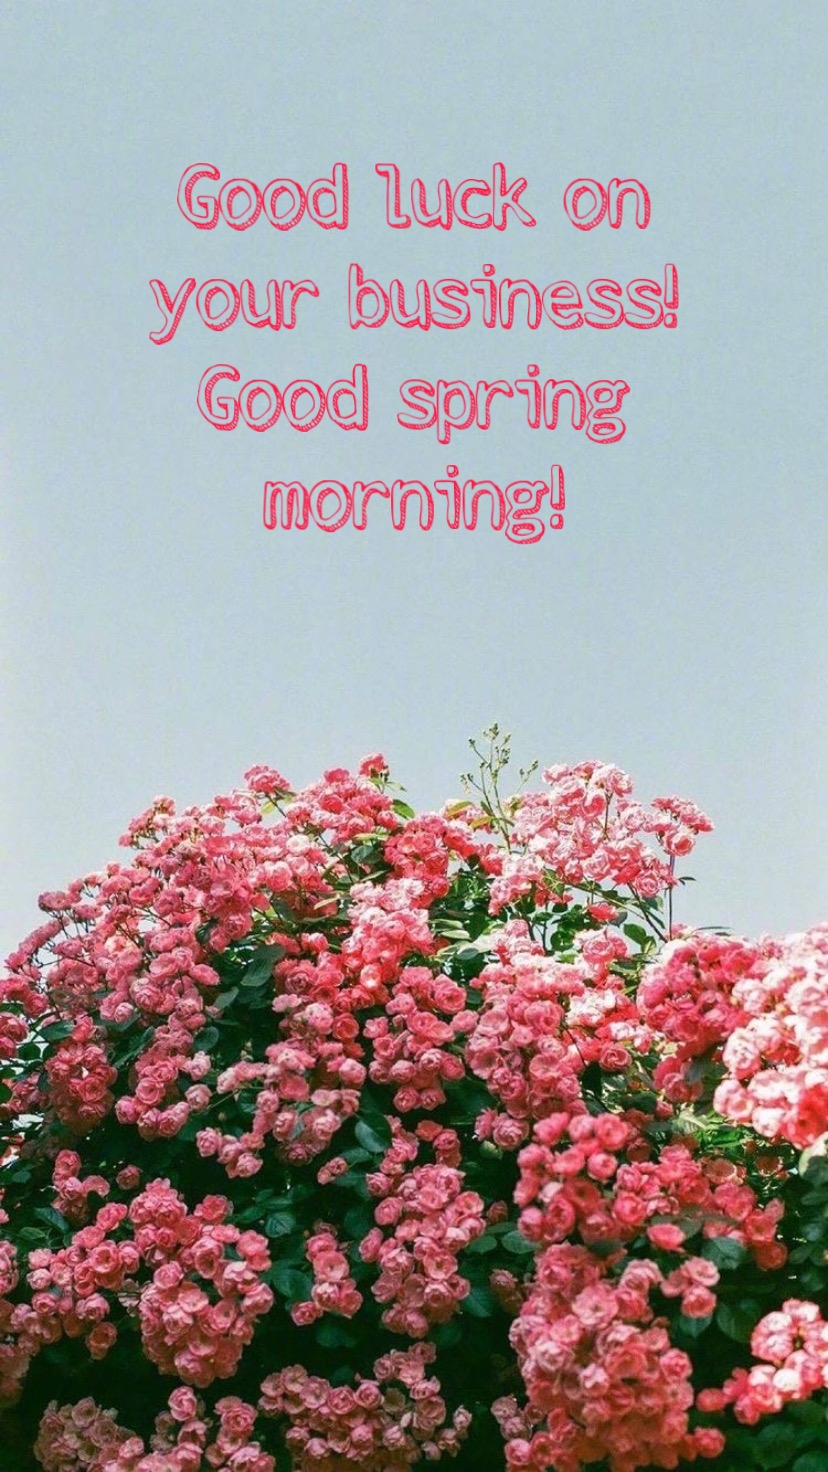 Good luck on your business! Good spring morning!